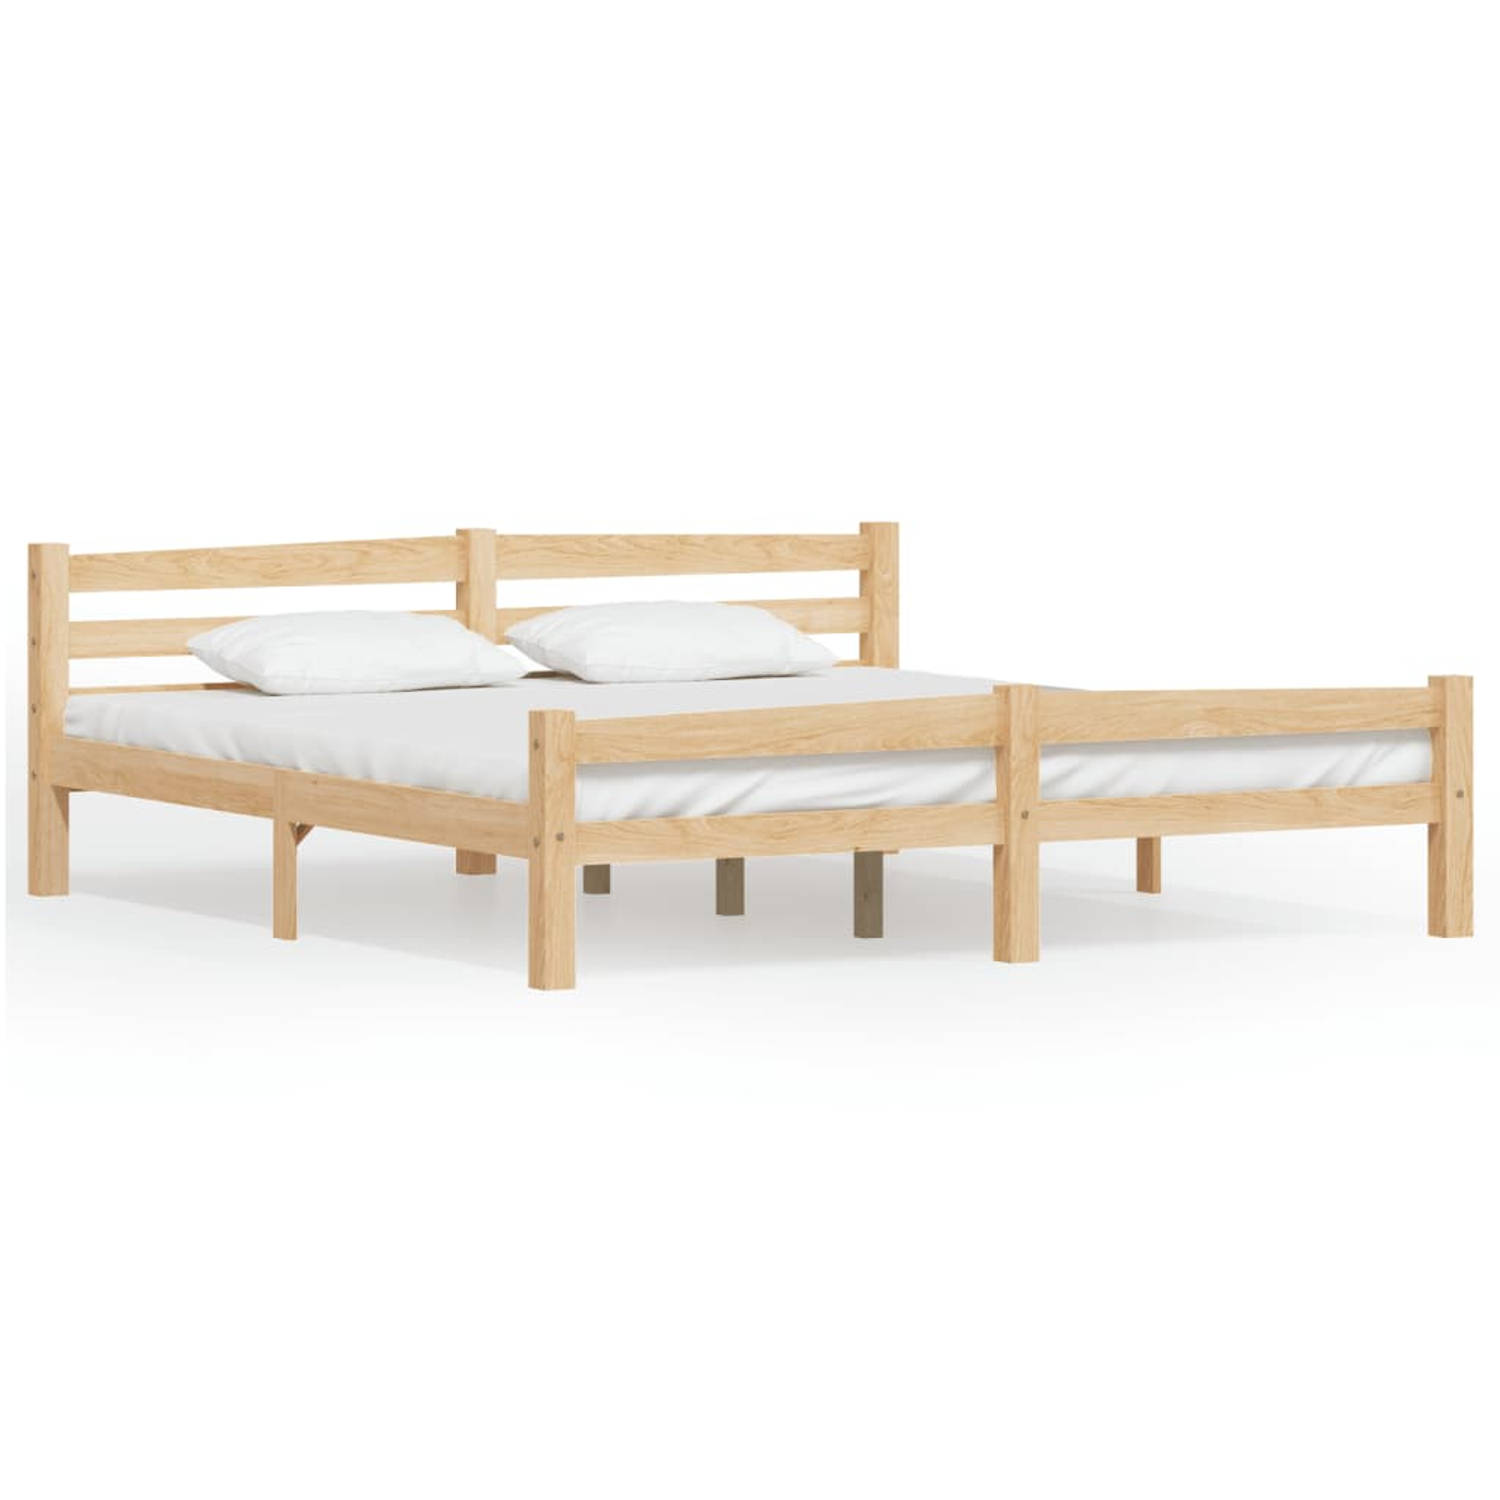 The Living Store Bedframe massief grenenhout 180x200 cm - Bedframe - Bedframe - Bed Frame - Bed Frames - Bed - Bedden - 2-persoonsbed - 2-persoonsbedden - Tweepersoons Bed